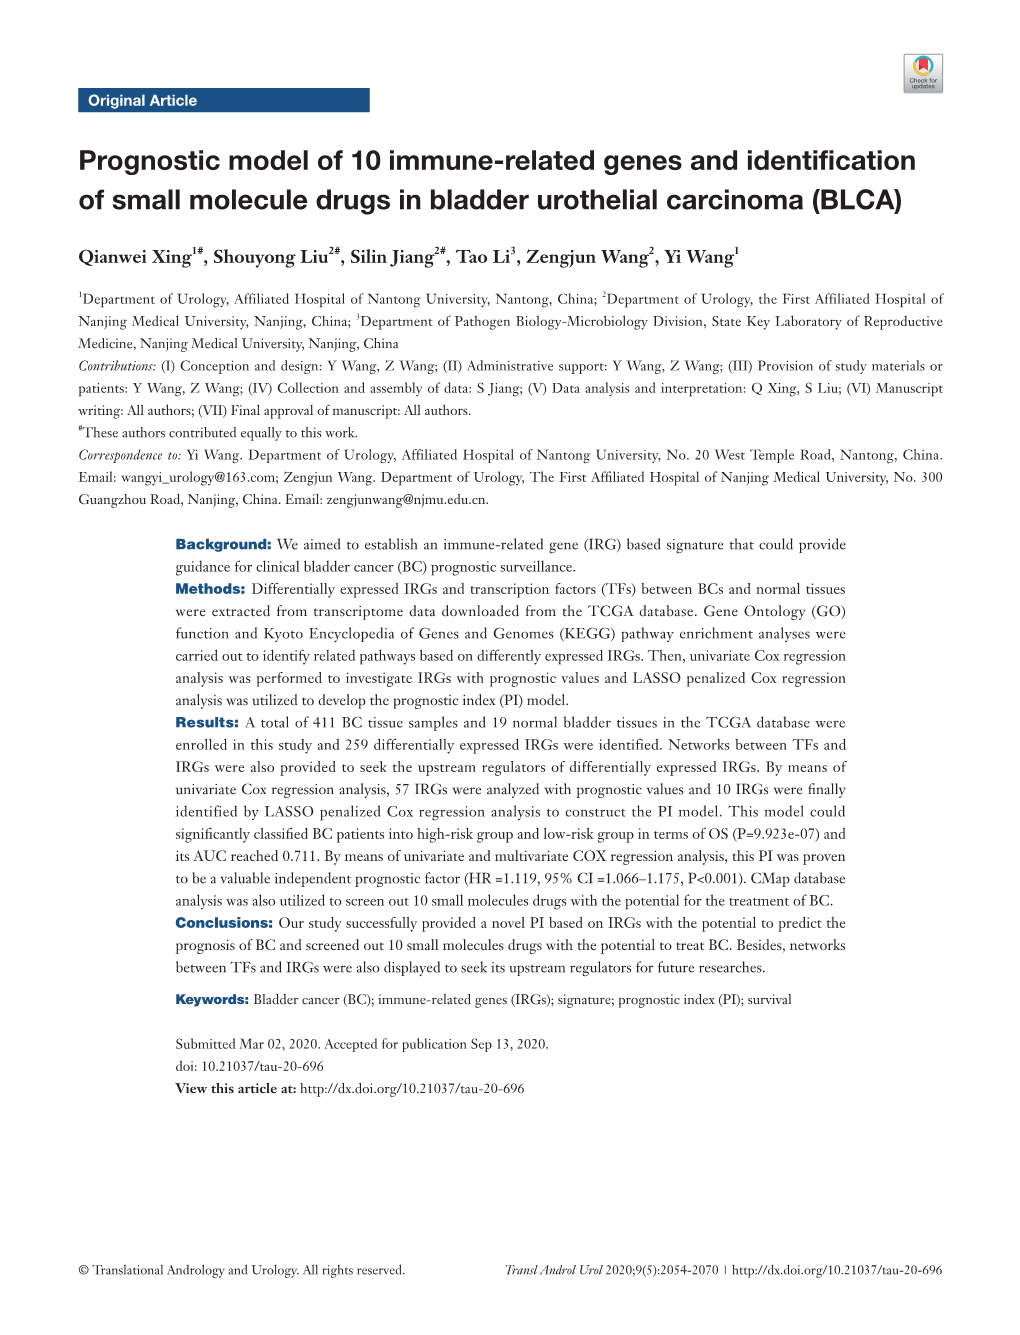 Prognostic Model of 10 Immune-Related Genes and Identification of Small Molecule Drugs in Bladder Urothelial Carcinoma (BLCA)